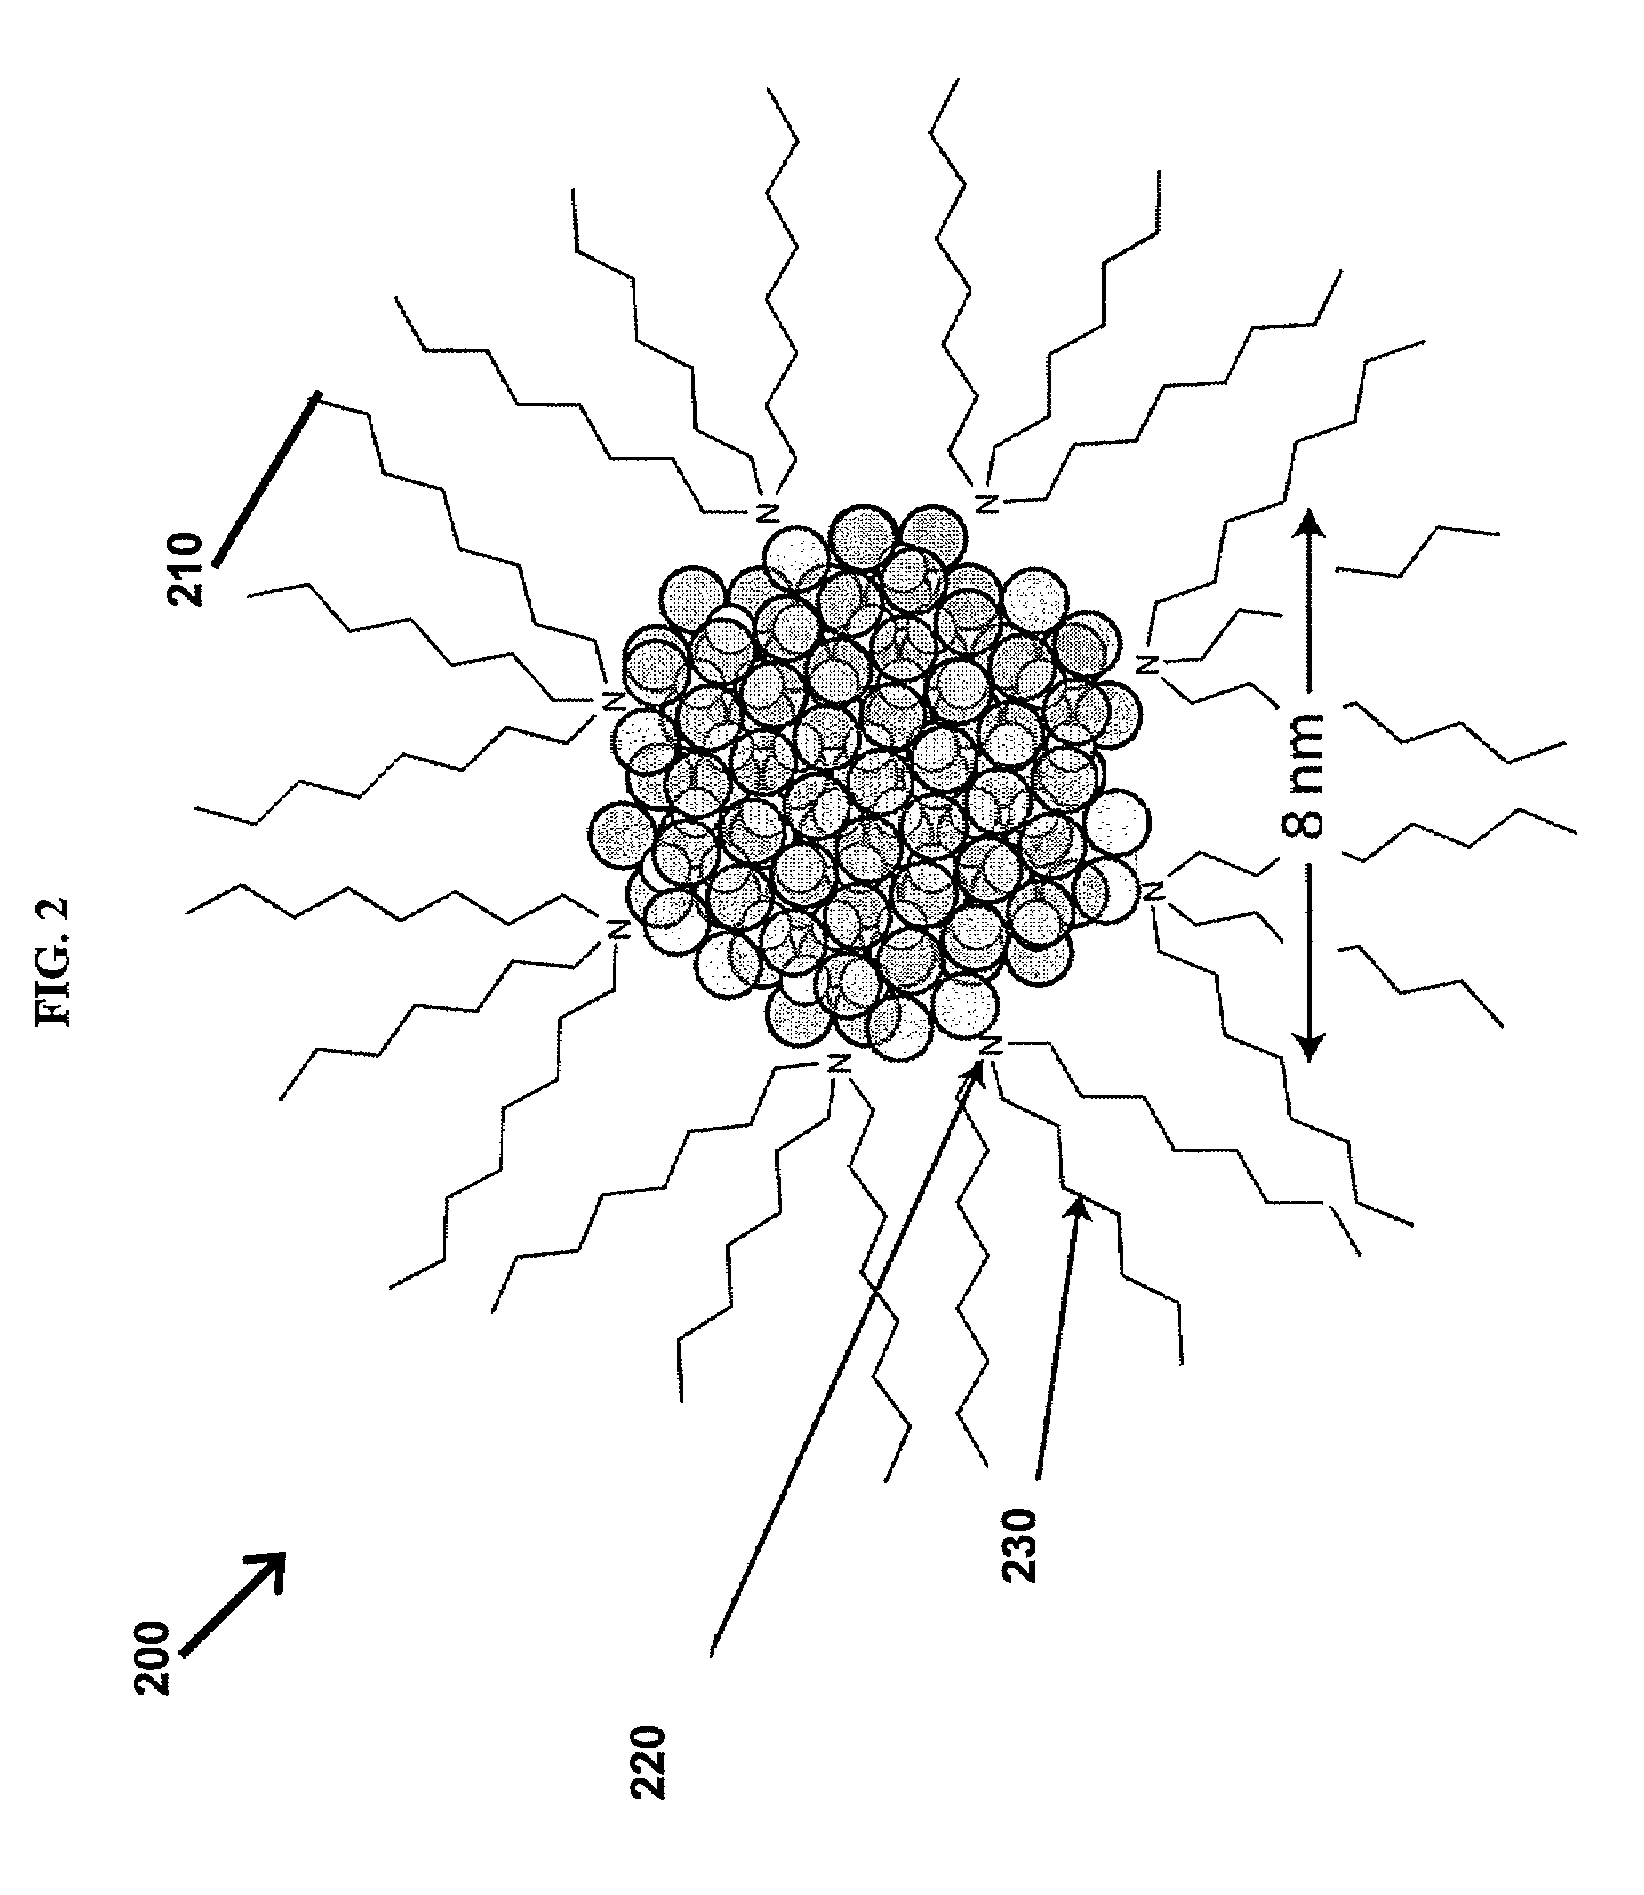 Preparation of nanoparticle materials